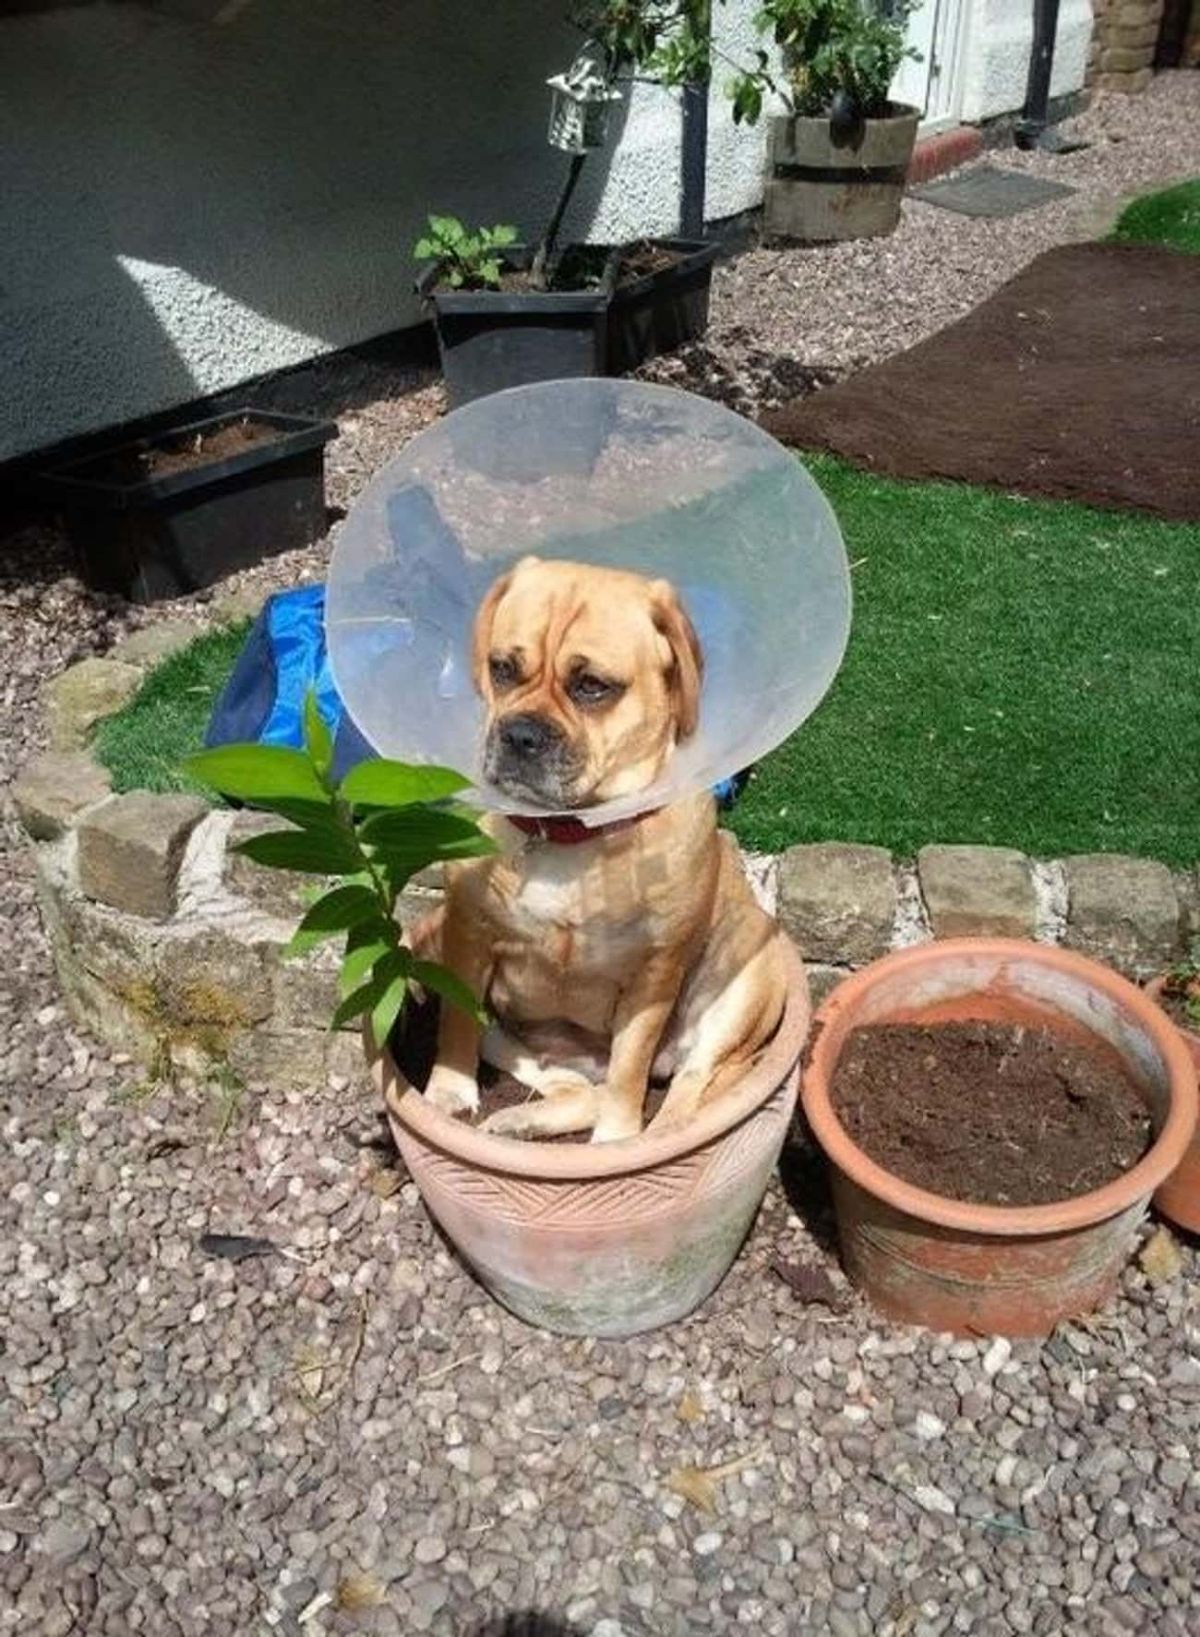 brown and white dog wearing a plastic elizabethan cone sitting in a brown pot full of soil and a plant next to a pot of soil in a garden